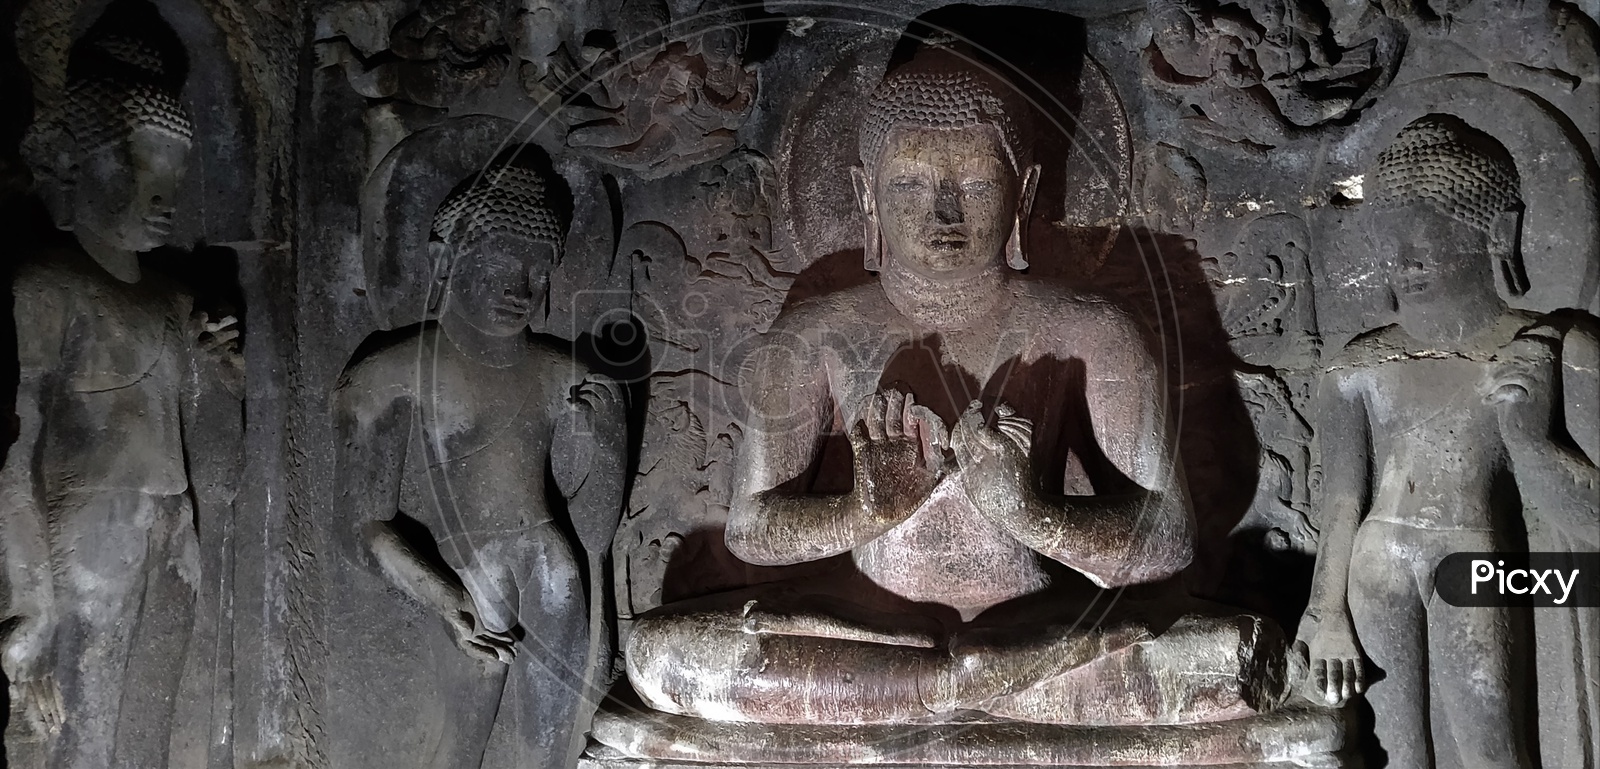 Stone Carvings or sculptures Of Buddha Statues At Ajanta Caves